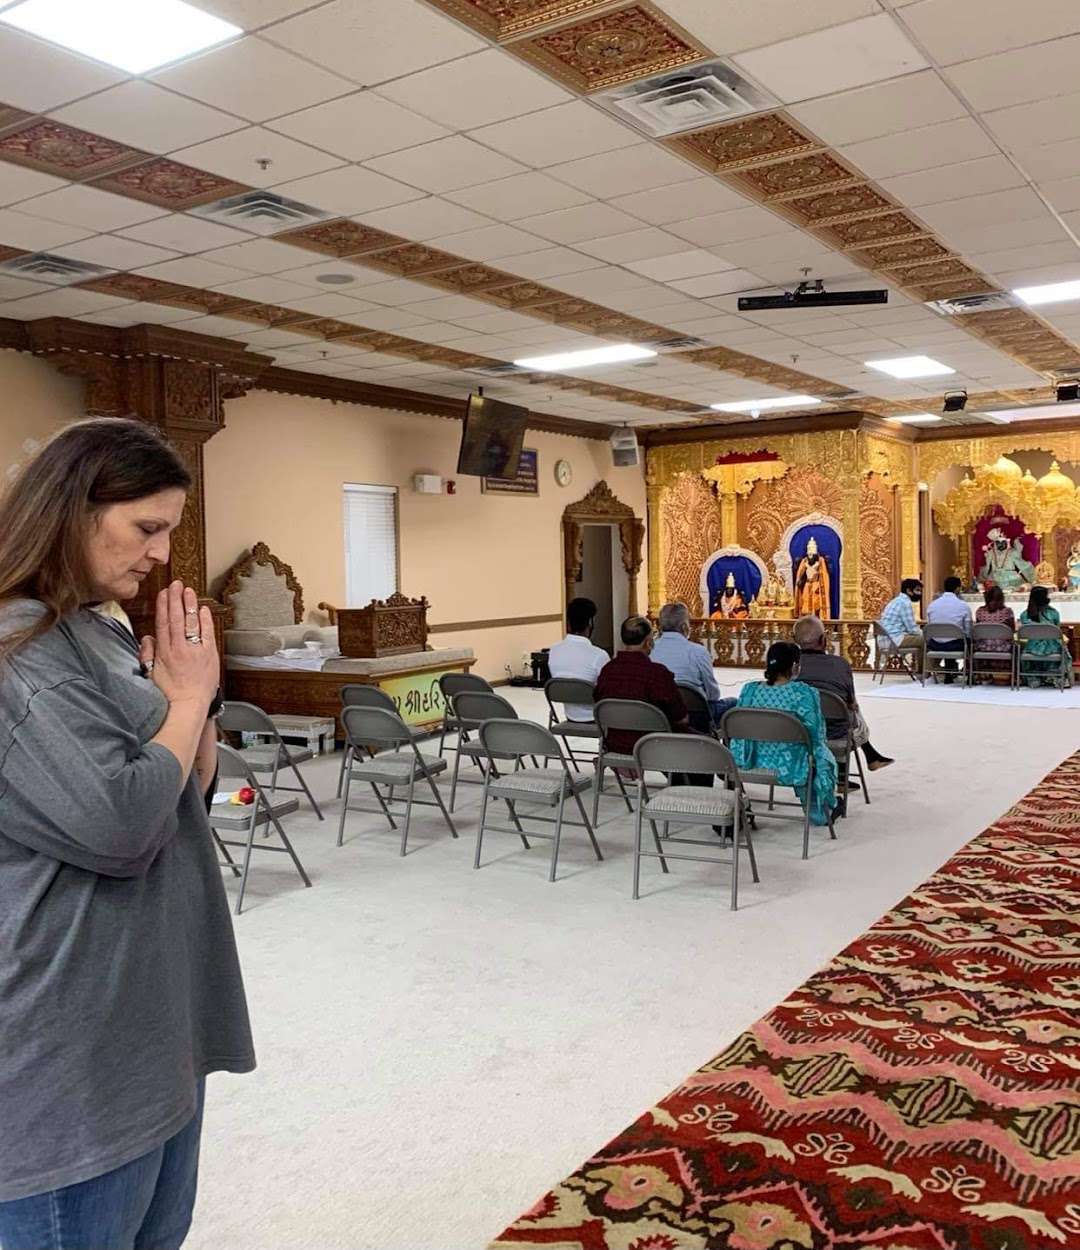 Hindu Community Center, Knoxville